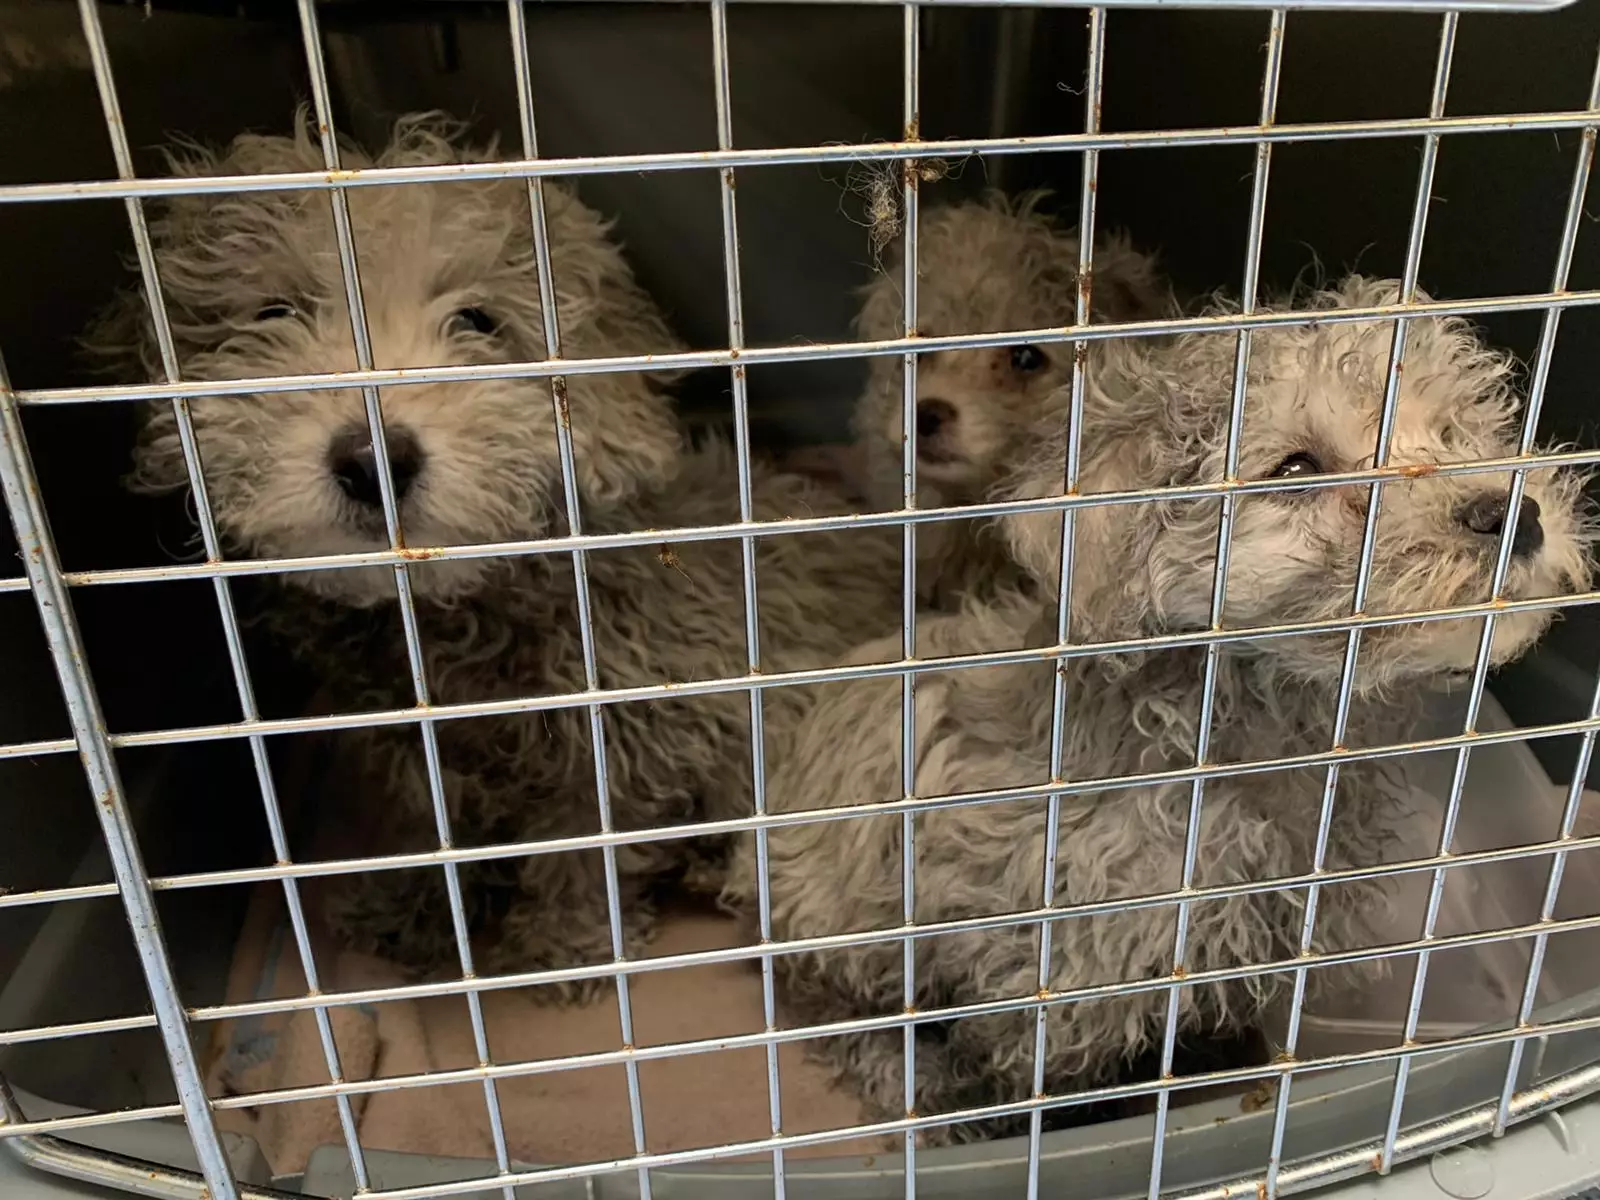 The pups were found in Dover (